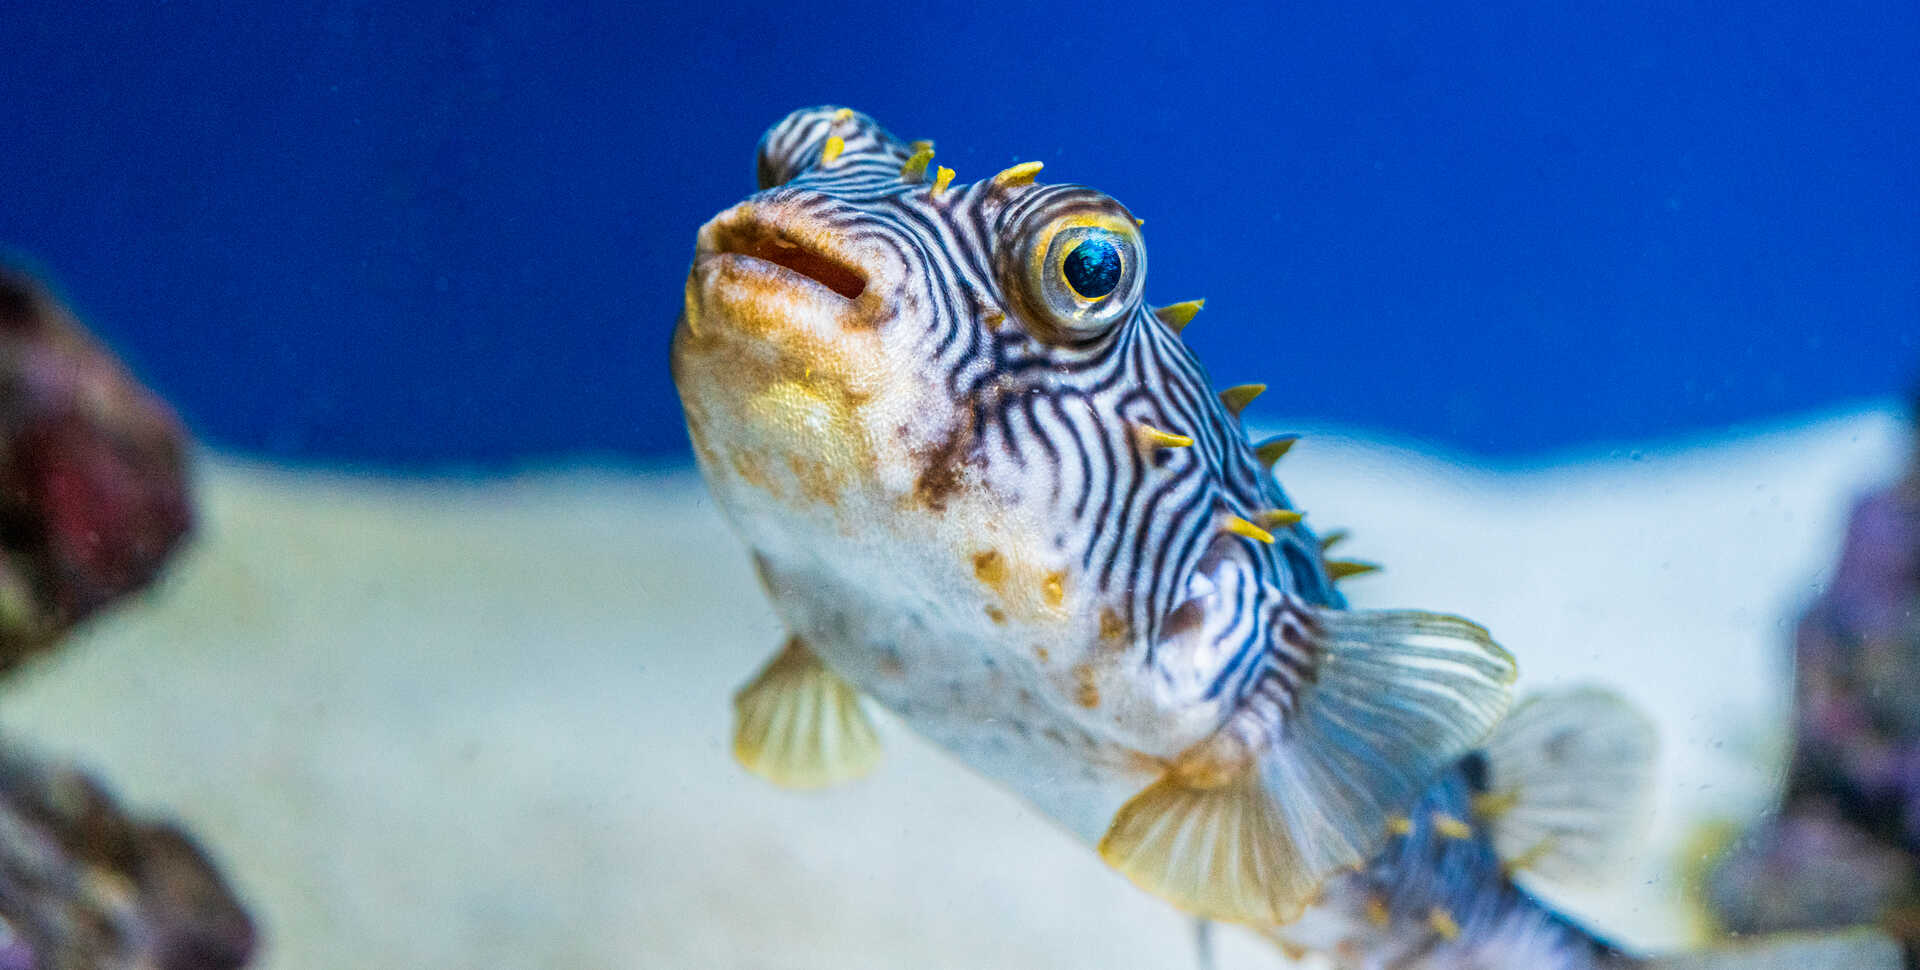 Very cute striped burrfish with big bulging eyes and maze pattern skin on exhibit in Steinhart Aquarium at Cal Academy. Photo by Gayle Laird